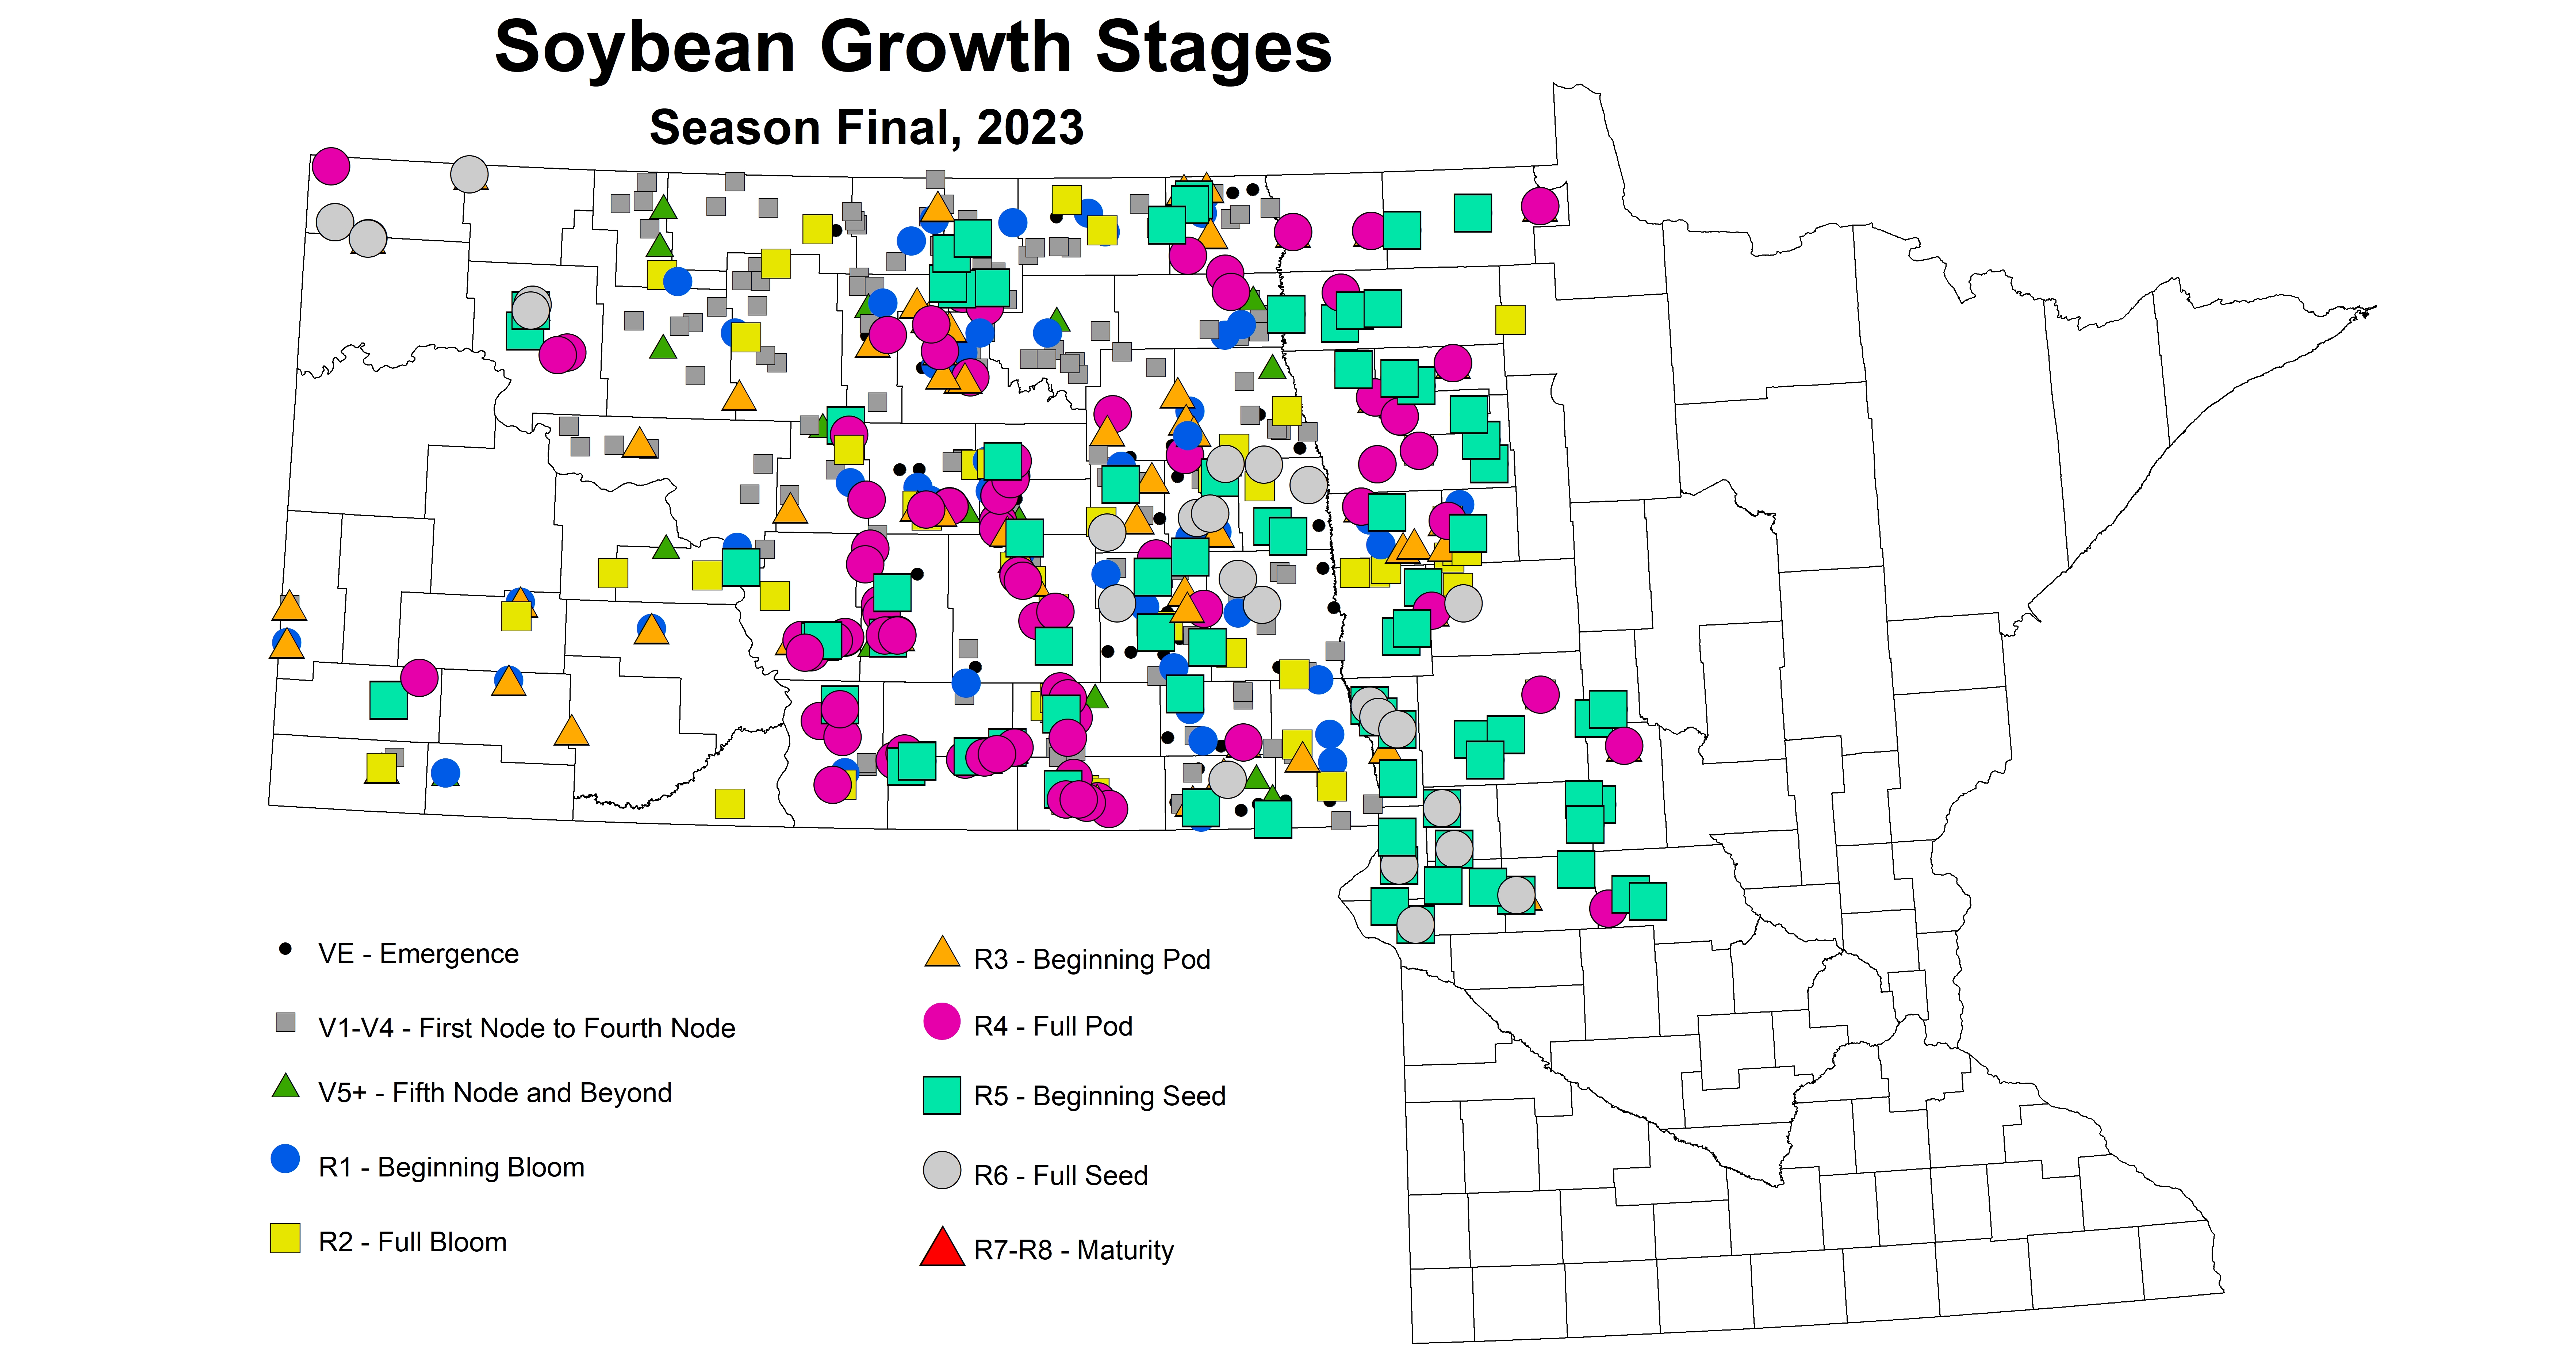 soybean growth stages season final 2023